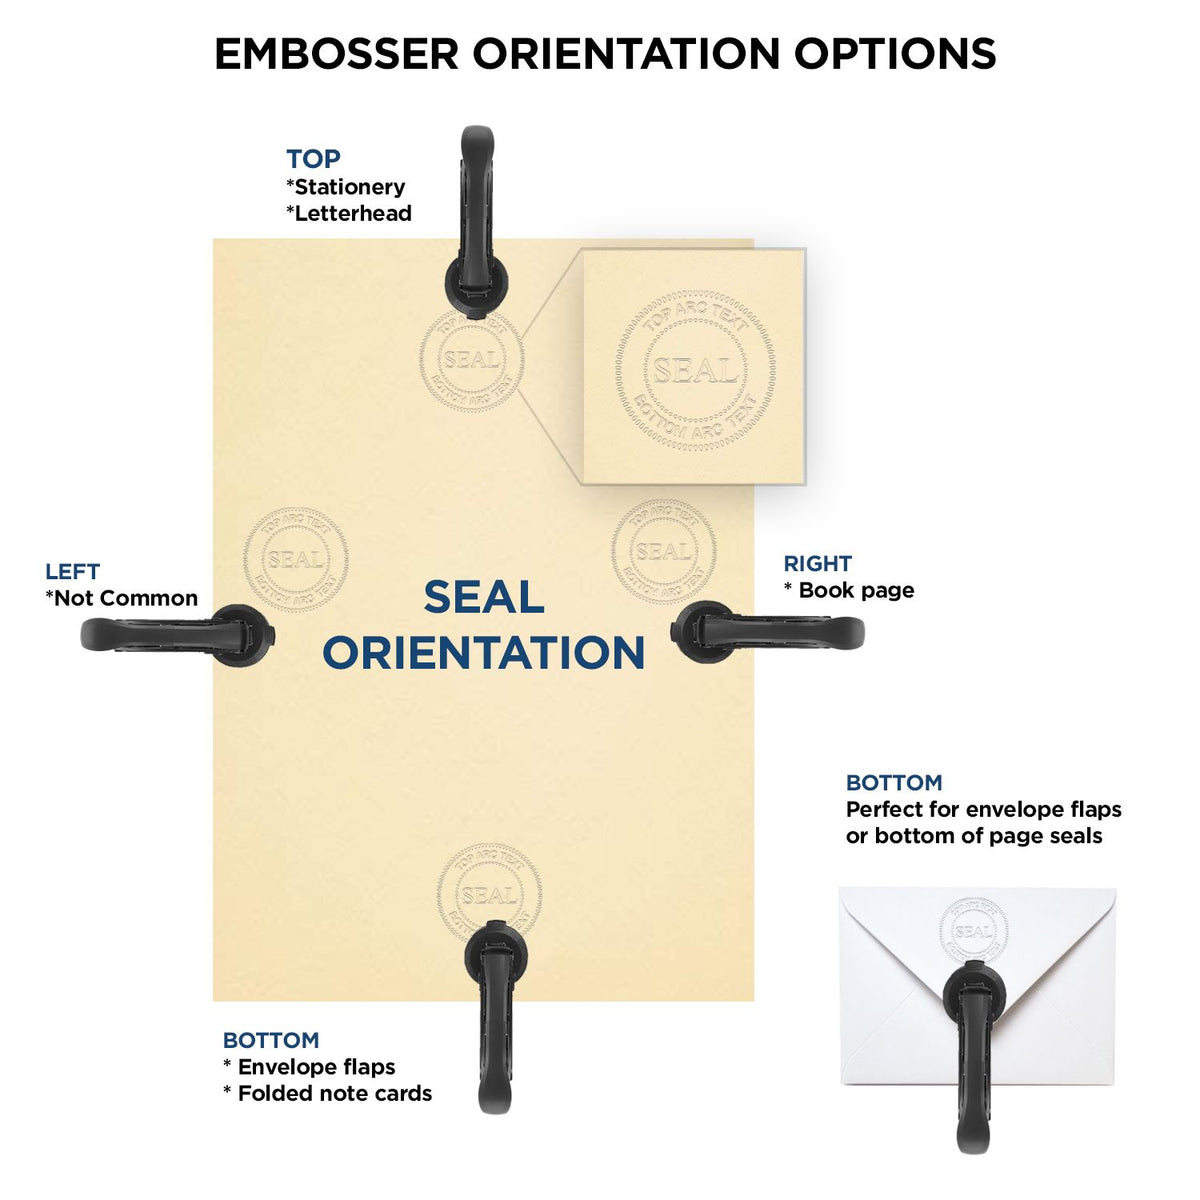 An infographic for the State of Idaho Extended Long Reach Geologist Seal showing embosser orientation, this is showing examples of a top, bottom, right and left insert.